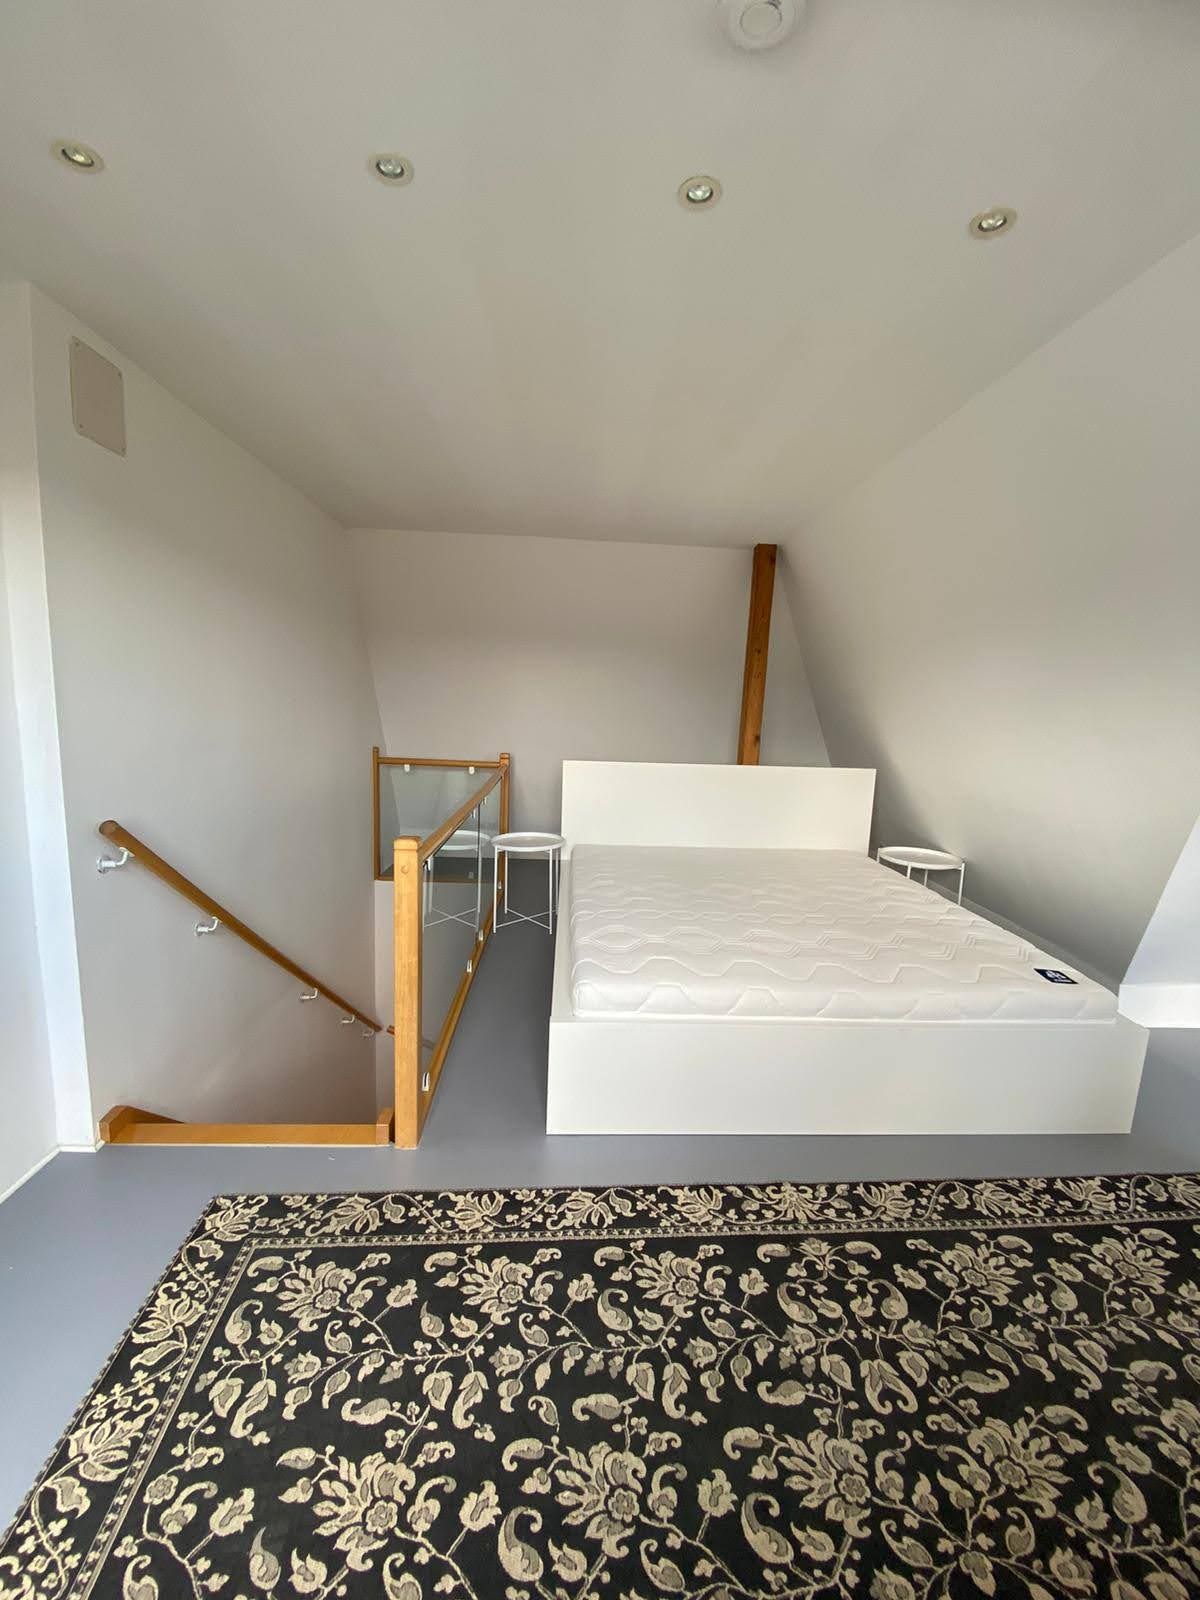 Spacious and perfect flat over the roofs of Stuttgart.